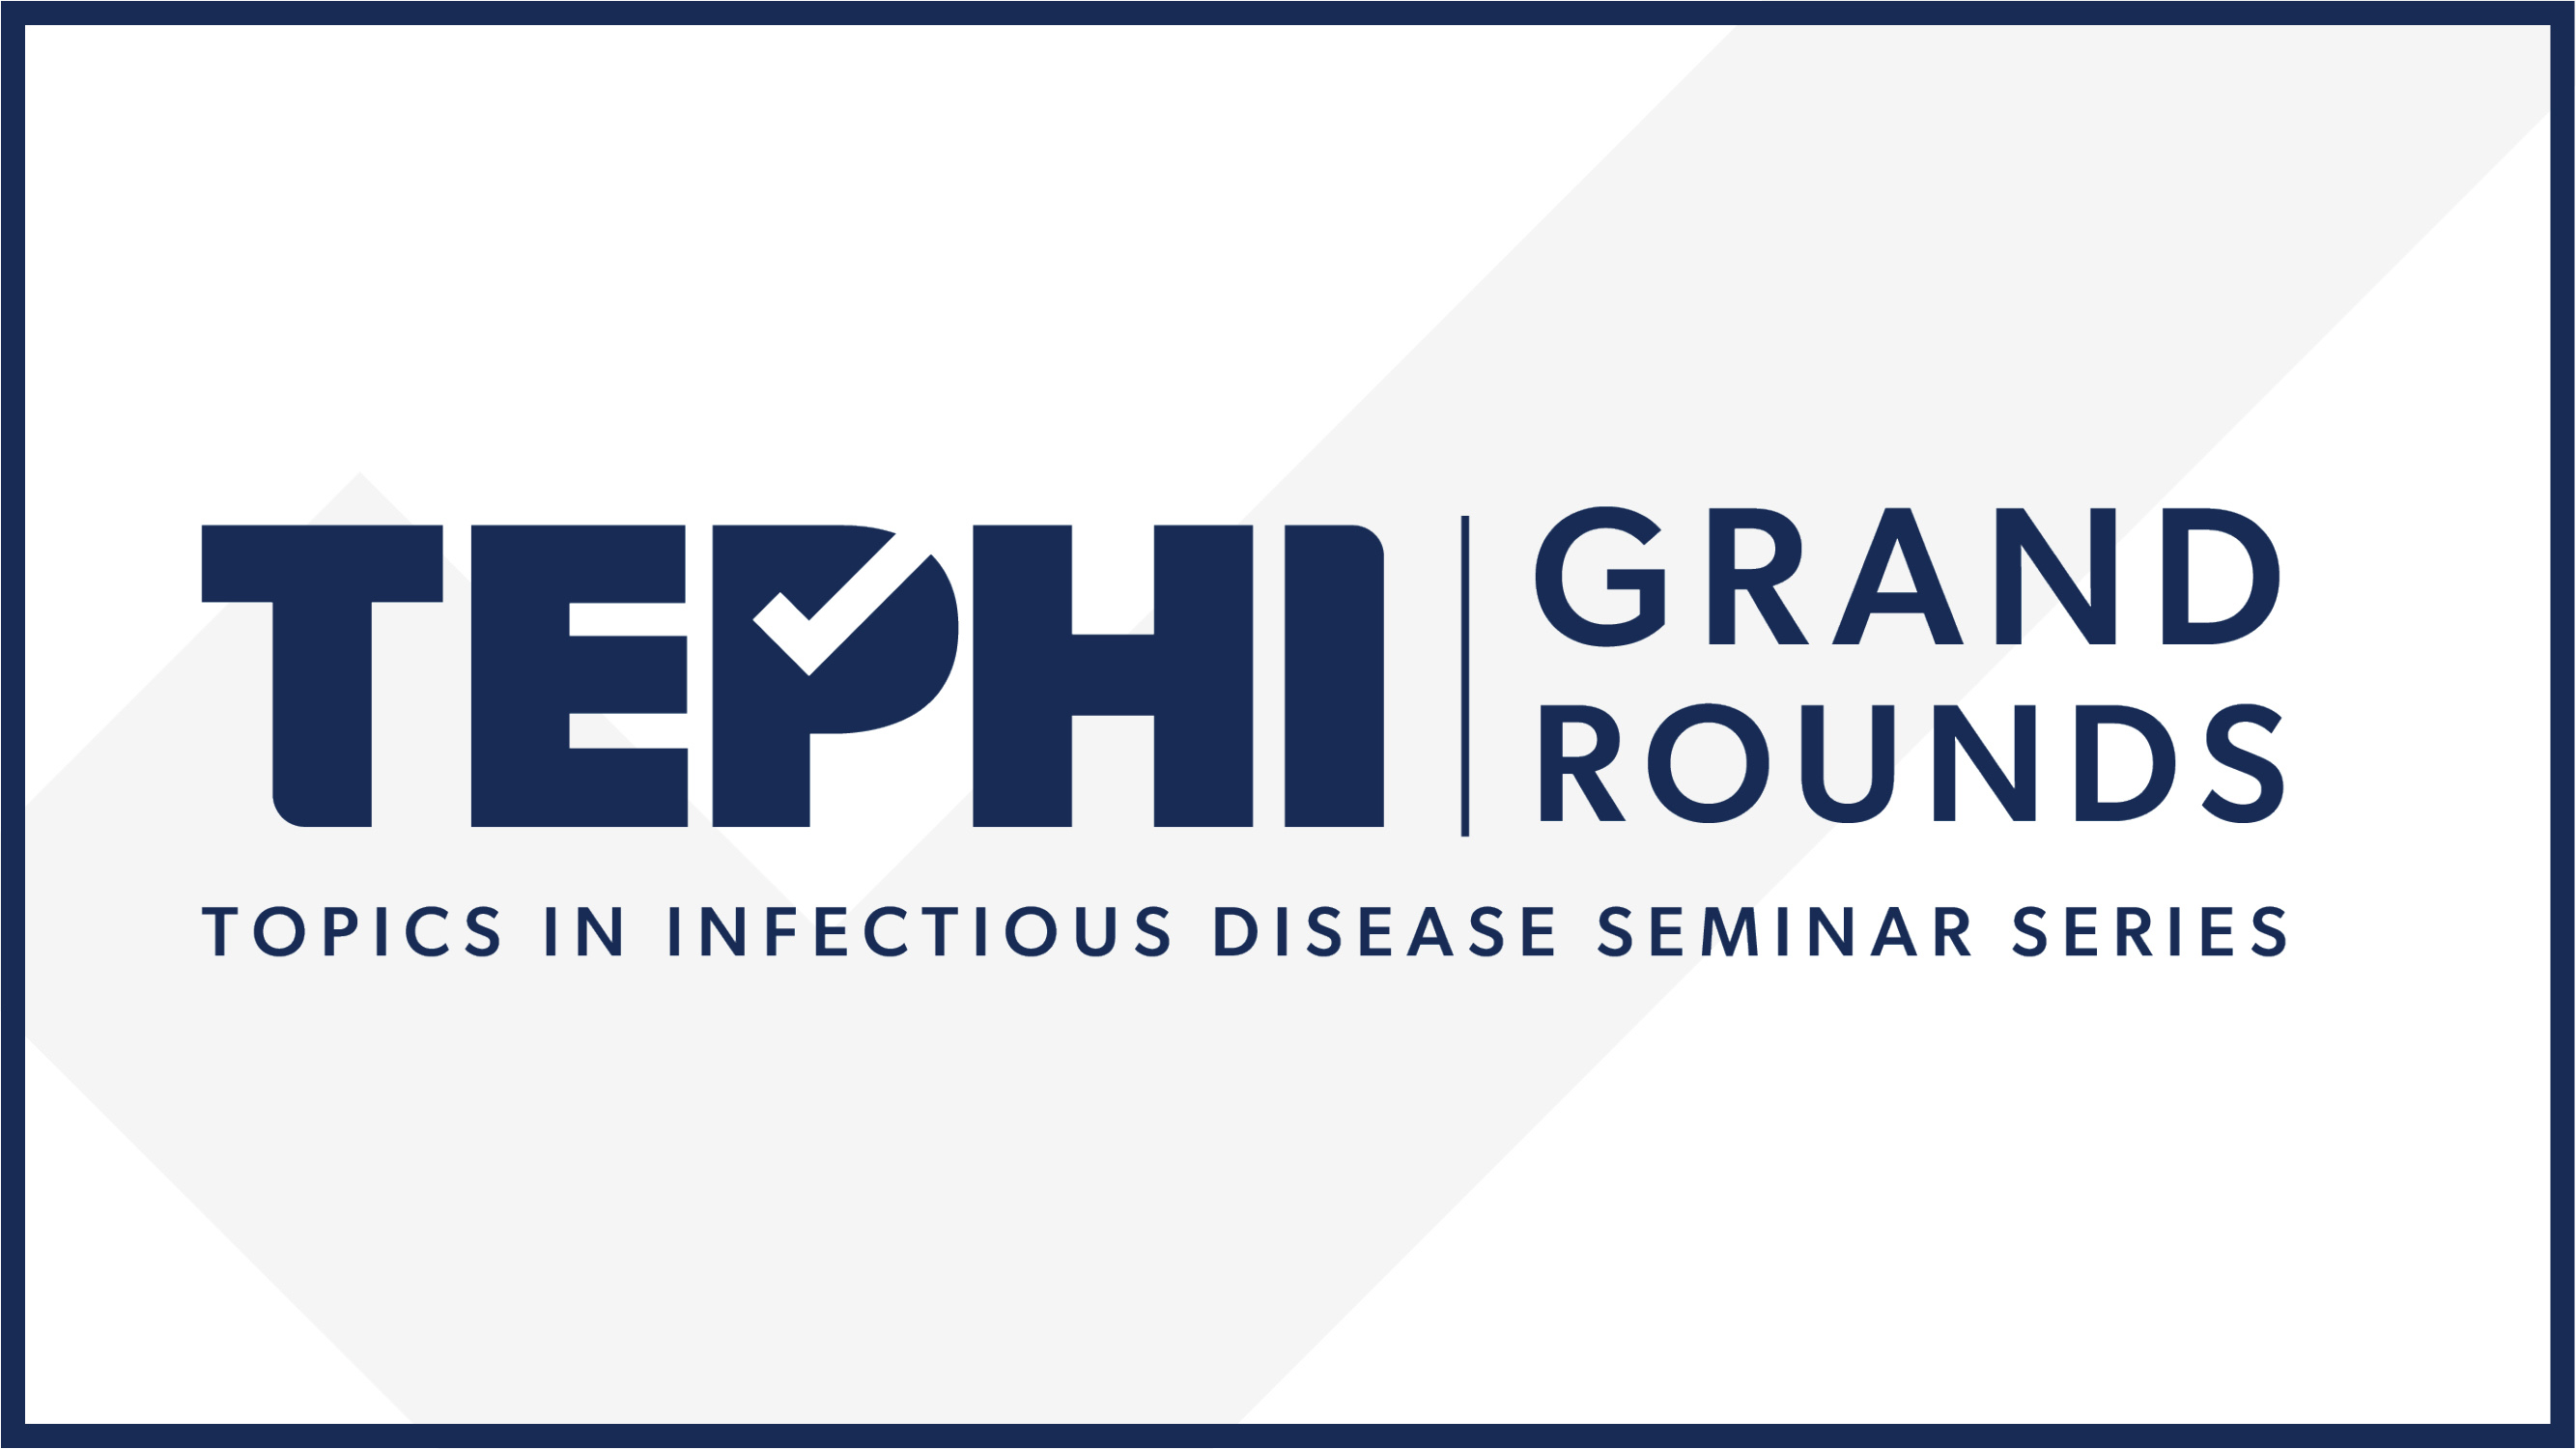 TEPHI Grand Rounds